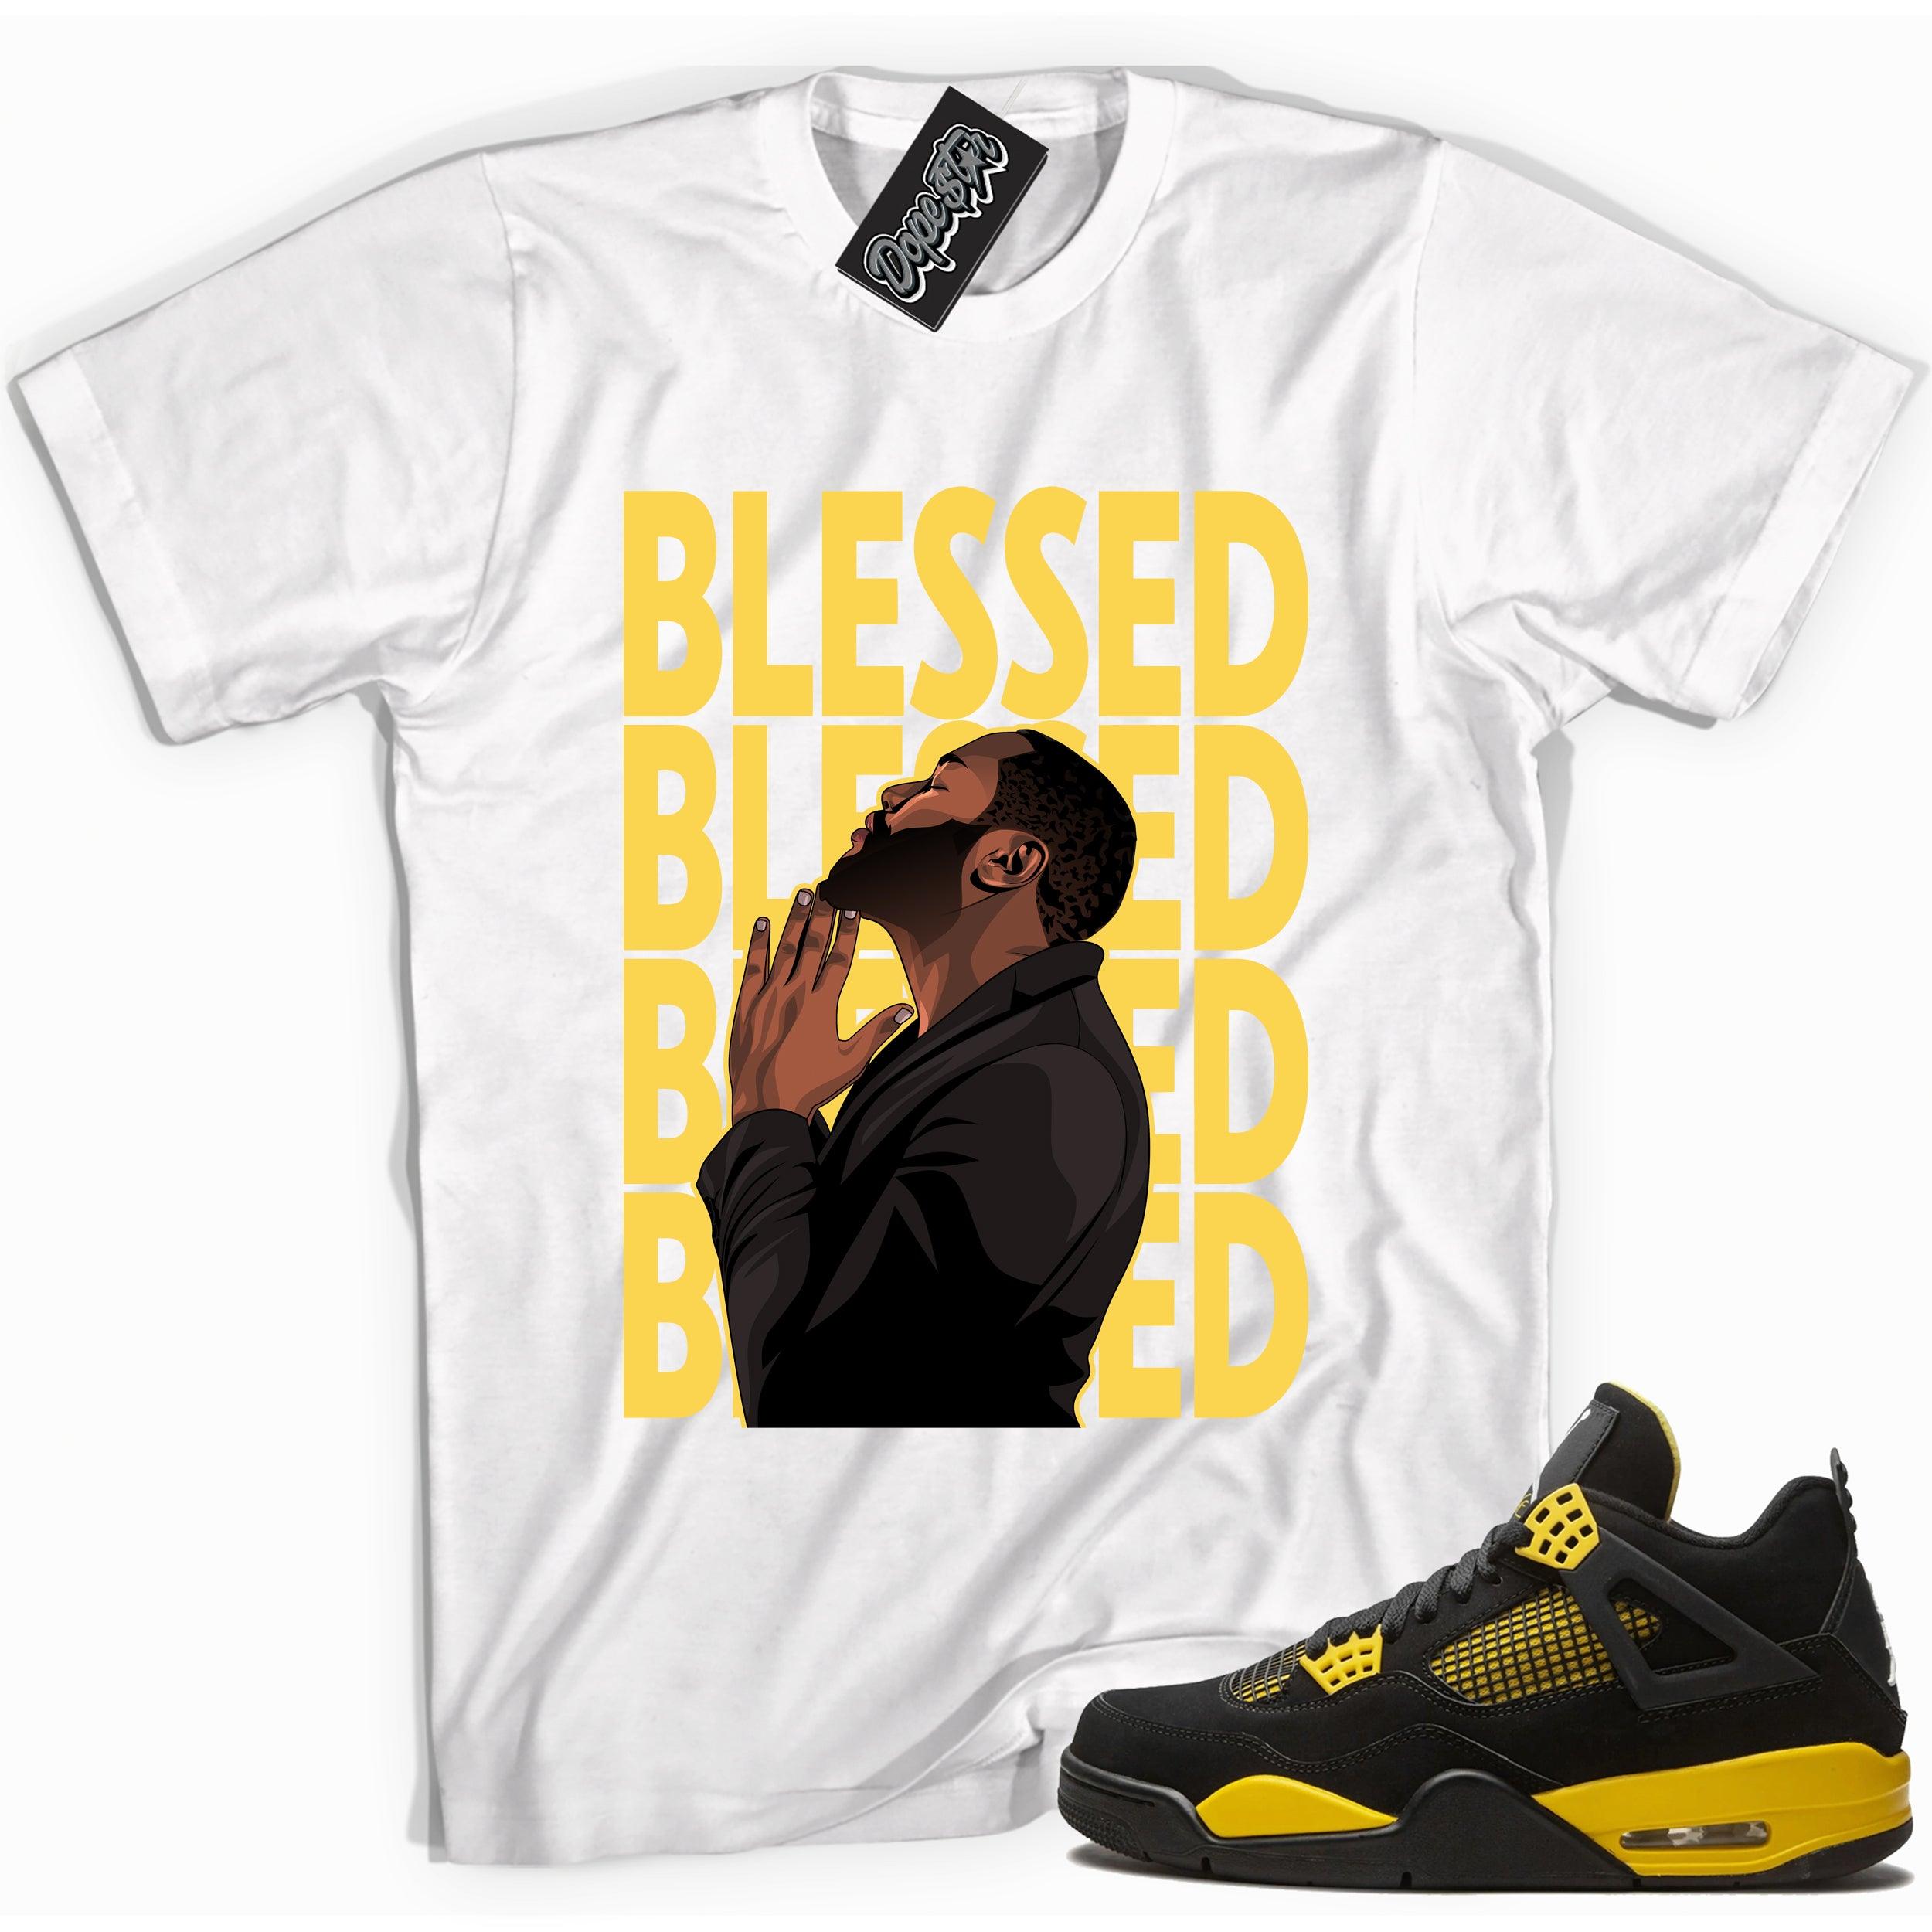 Cool white graphic tee with 'god blessed' print, that perfectly matches Air Jordan 4 Thunder sneakers